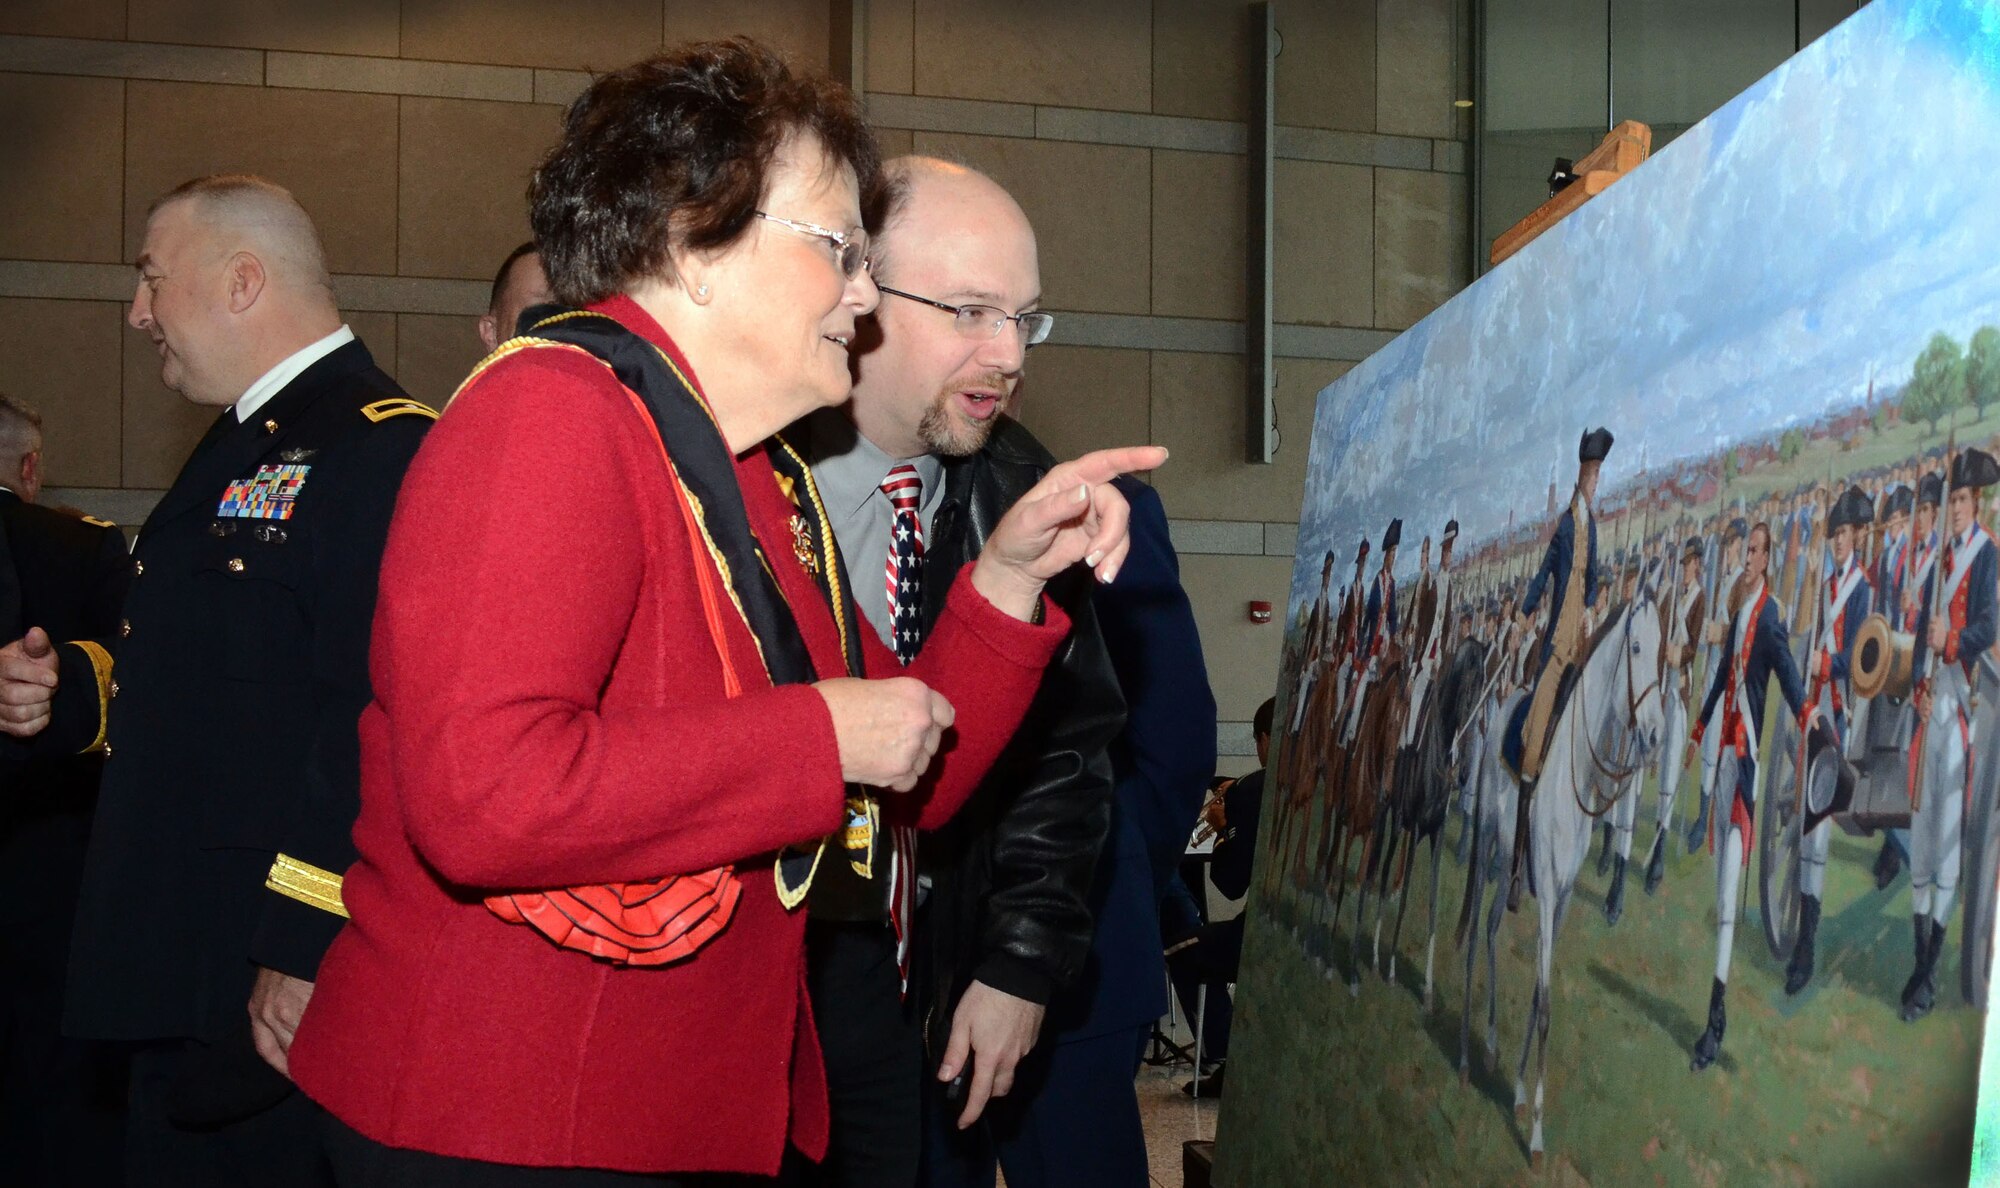 Military members and civilians take an opportunity to look at the painting, “Washington’s Review," by artist Larry Selman, during its unveiling Dec. 6, 2014, at the National Constitution Center”, Philadelphia, Pa. The painting is slated for display at the Pennsylvania National Guard’s Joint Force Headquarters at Fort Indiantown Gap, Pa. (U.S. Air National Guard photo by Master Sgt. Christopher Botzum/Released)